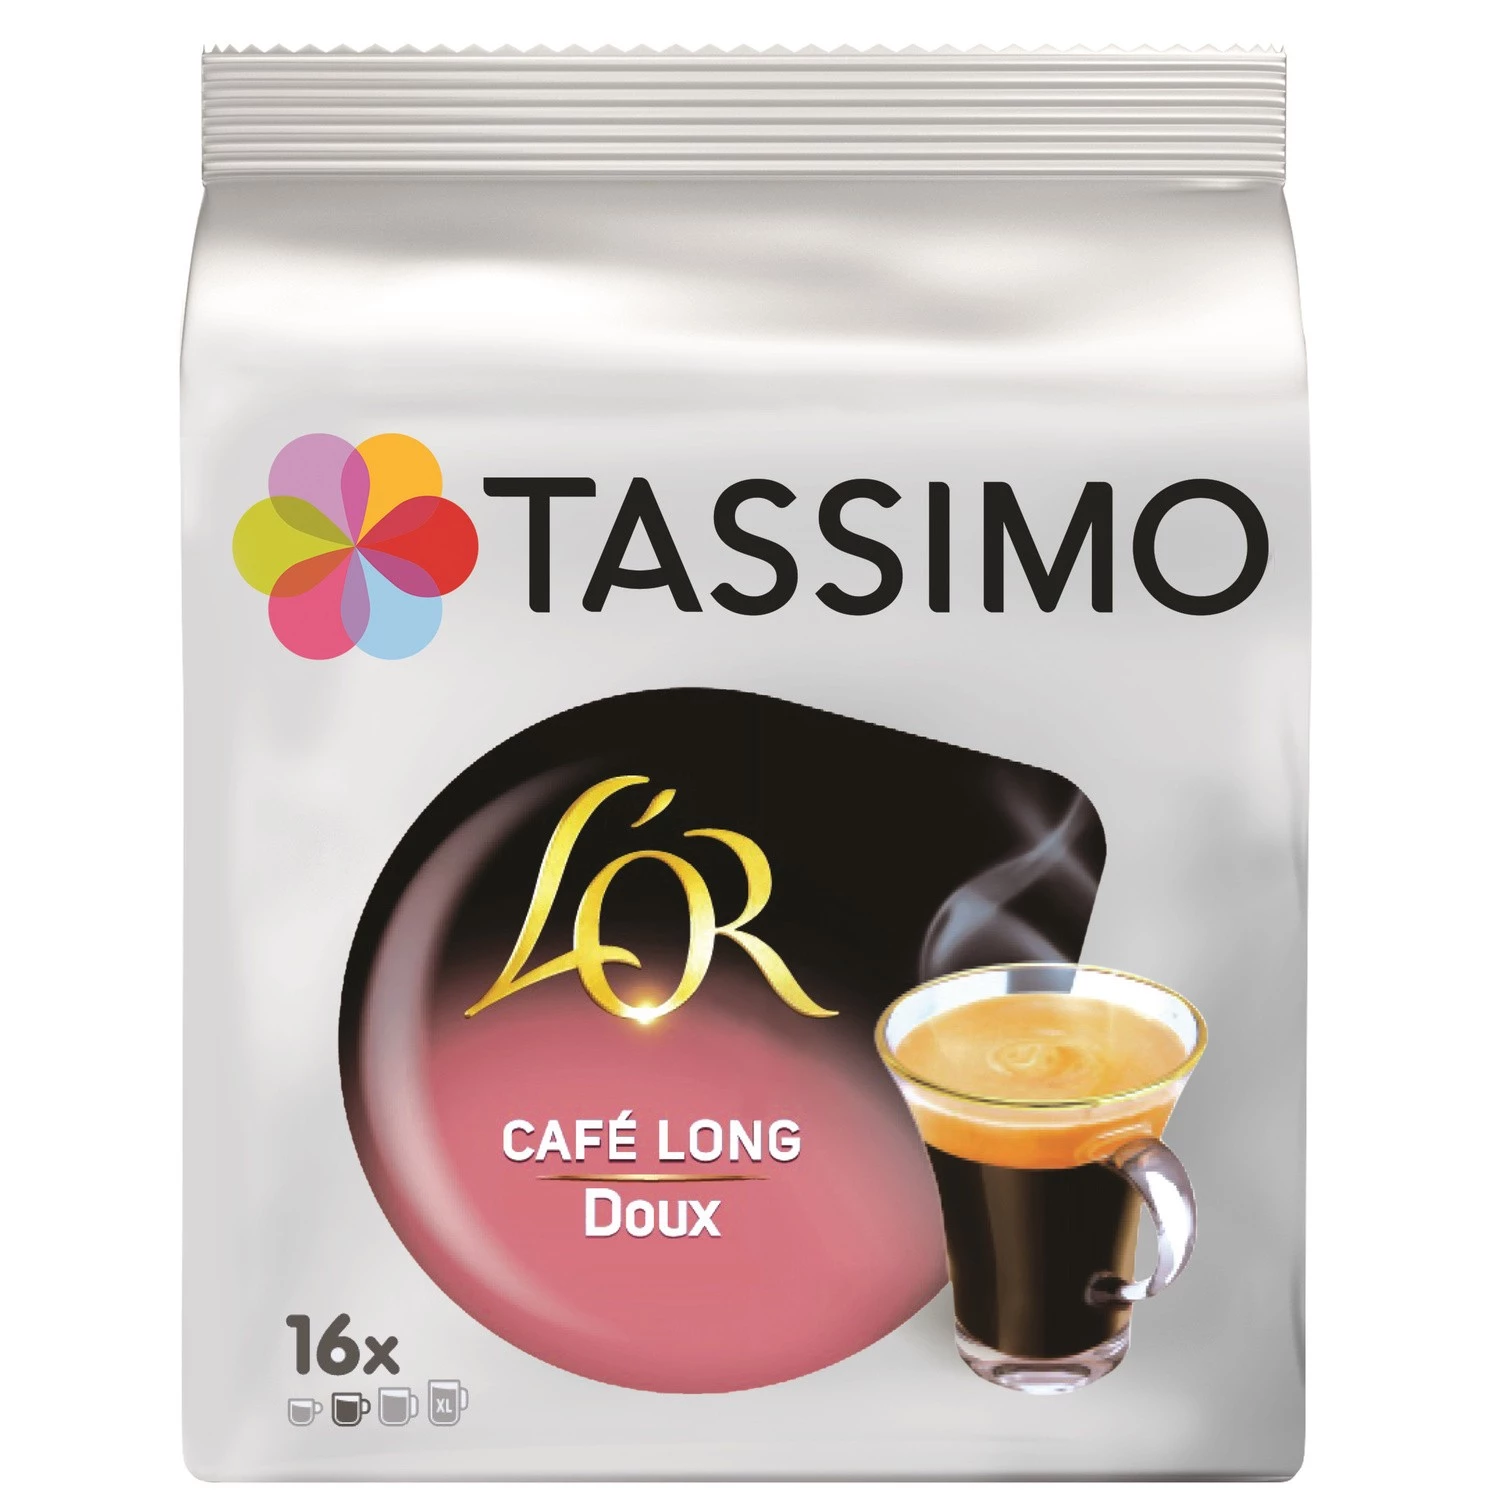 Long sweet coffee l'or x16 capsules 89g - TASSIMO